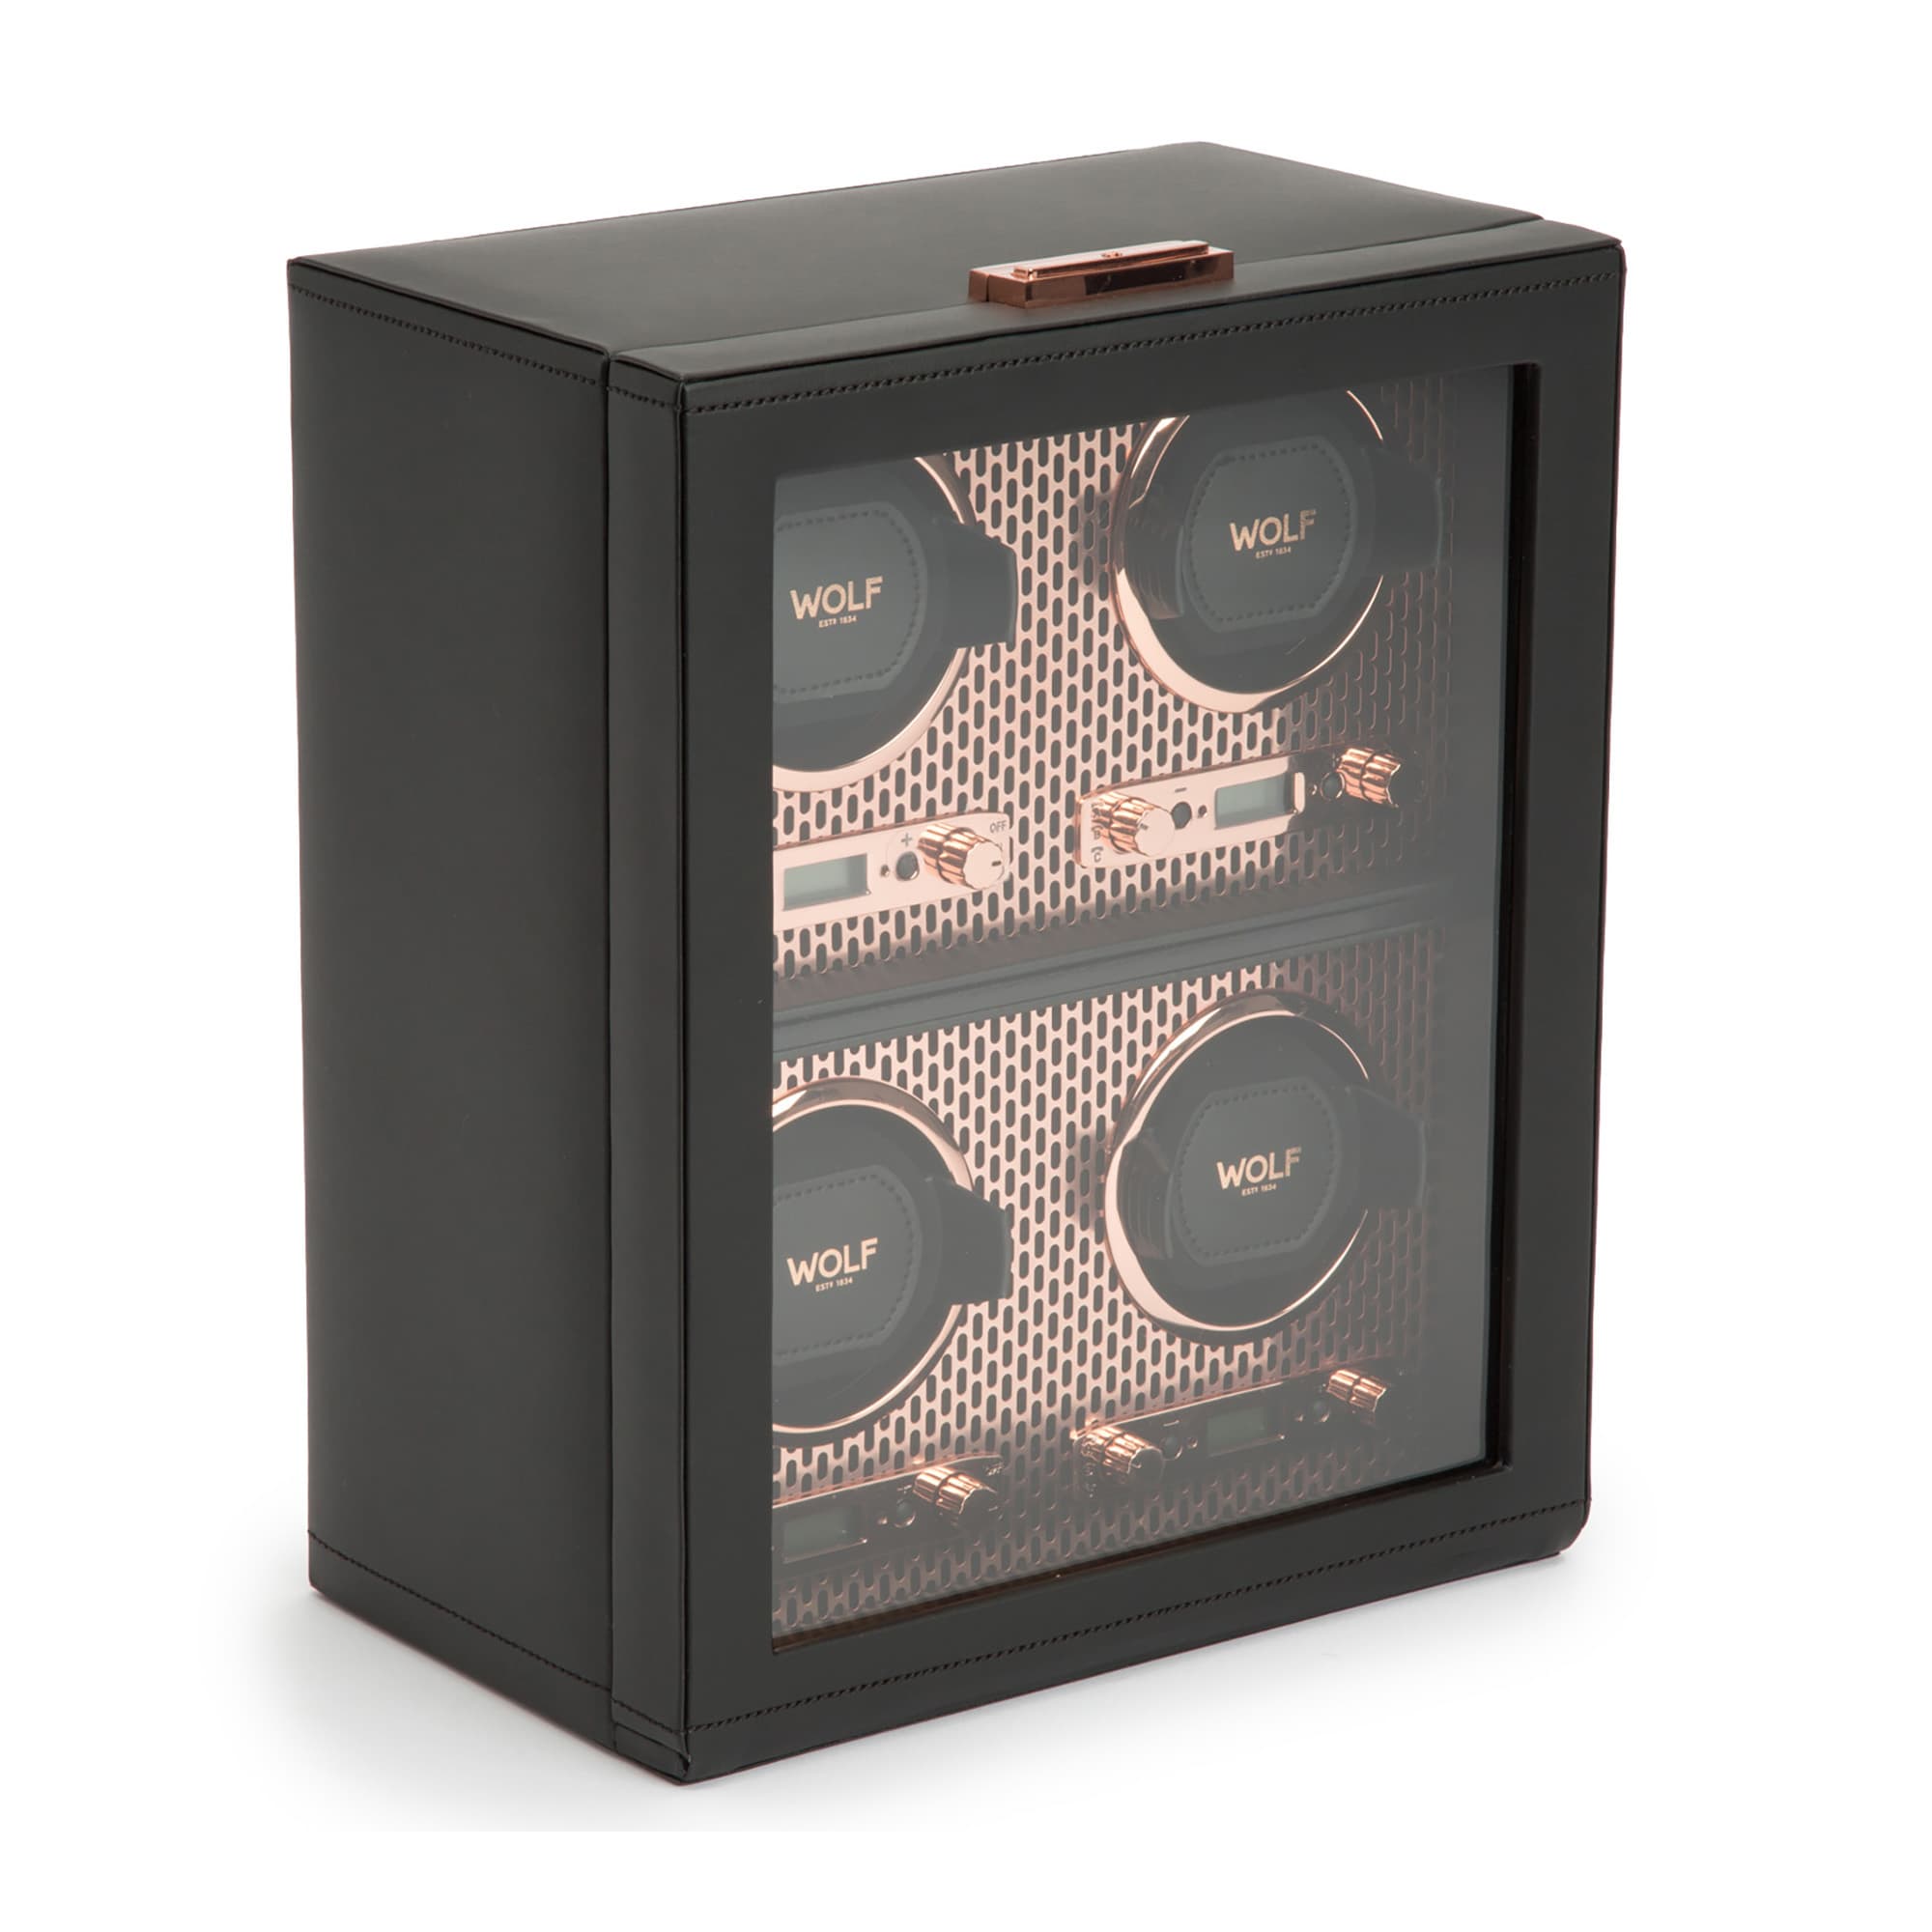 Wolf-Axis-4PC-Watch-Winder-Copper-469516-1